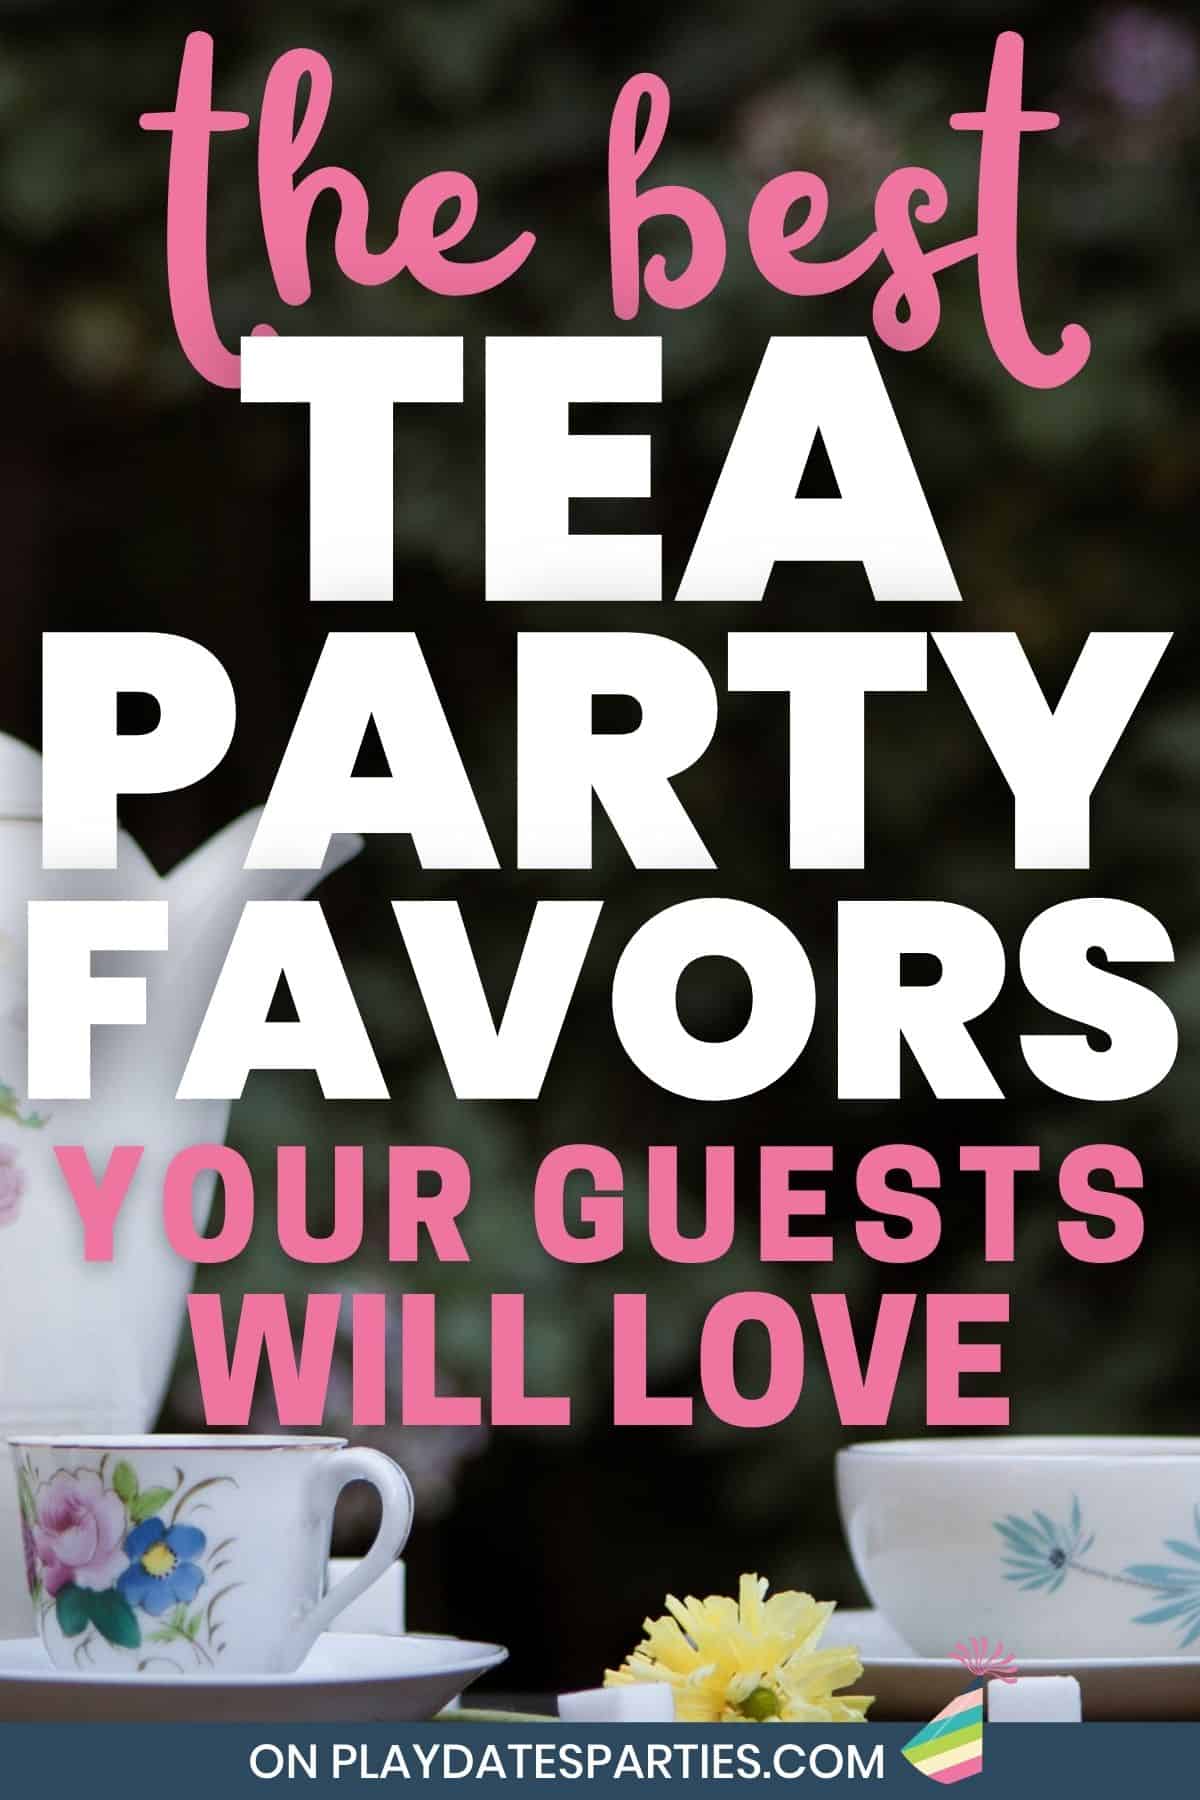 A table set for tea in a garden with text overlay the best tea party favors your guests will love.